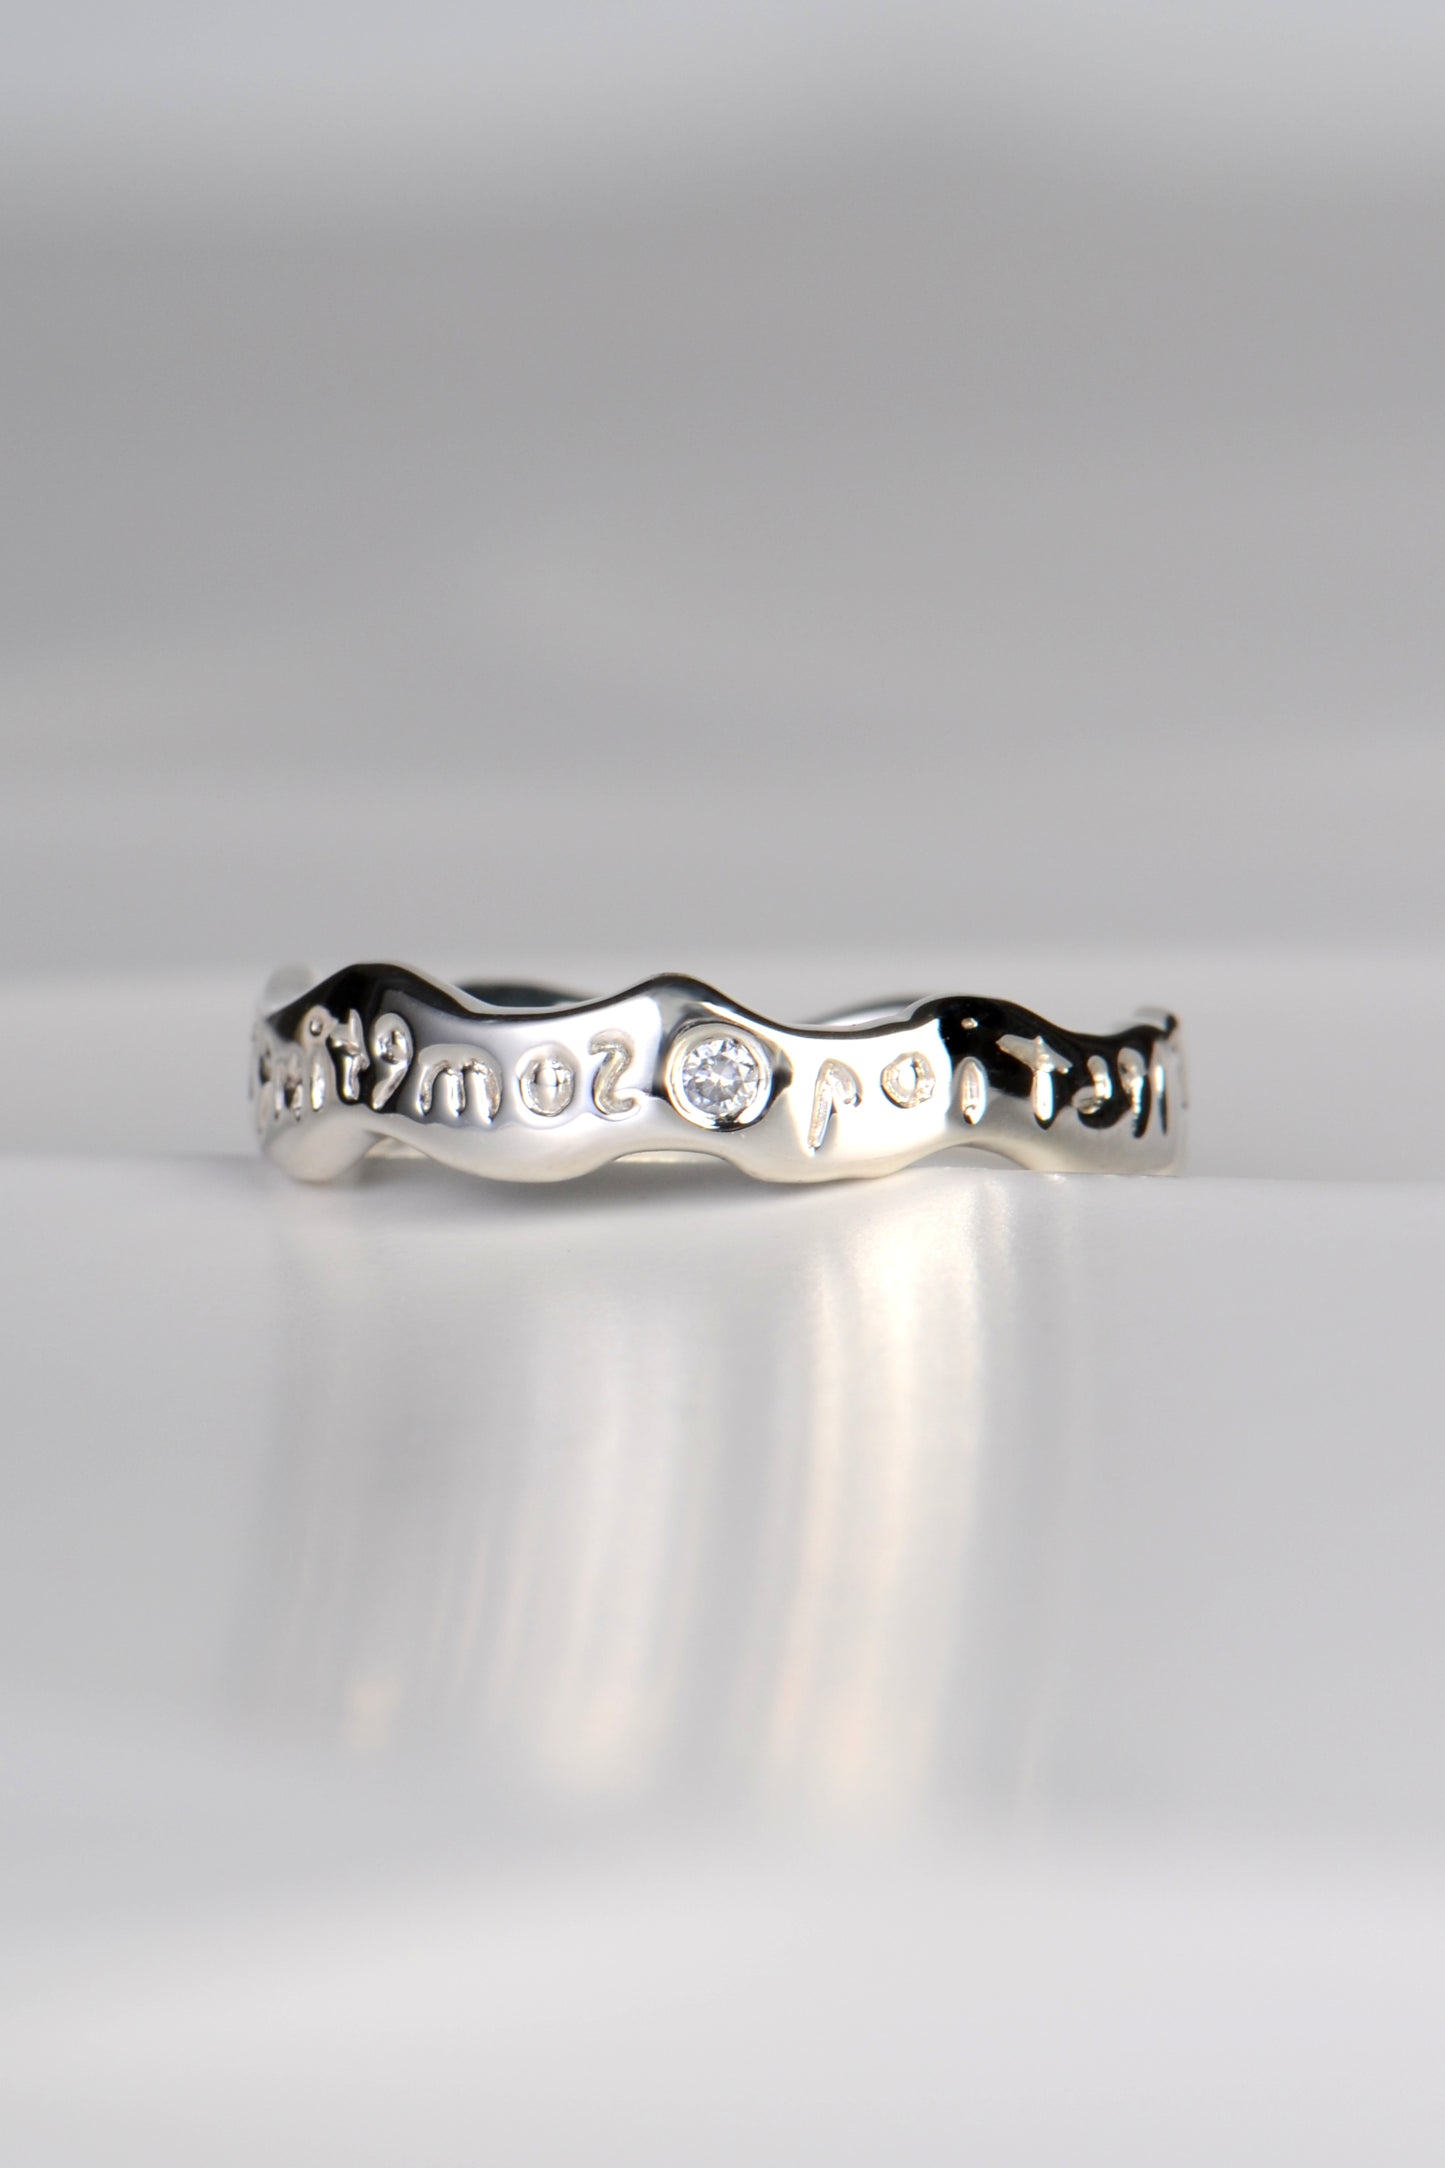 Reflection ring in sterling silver